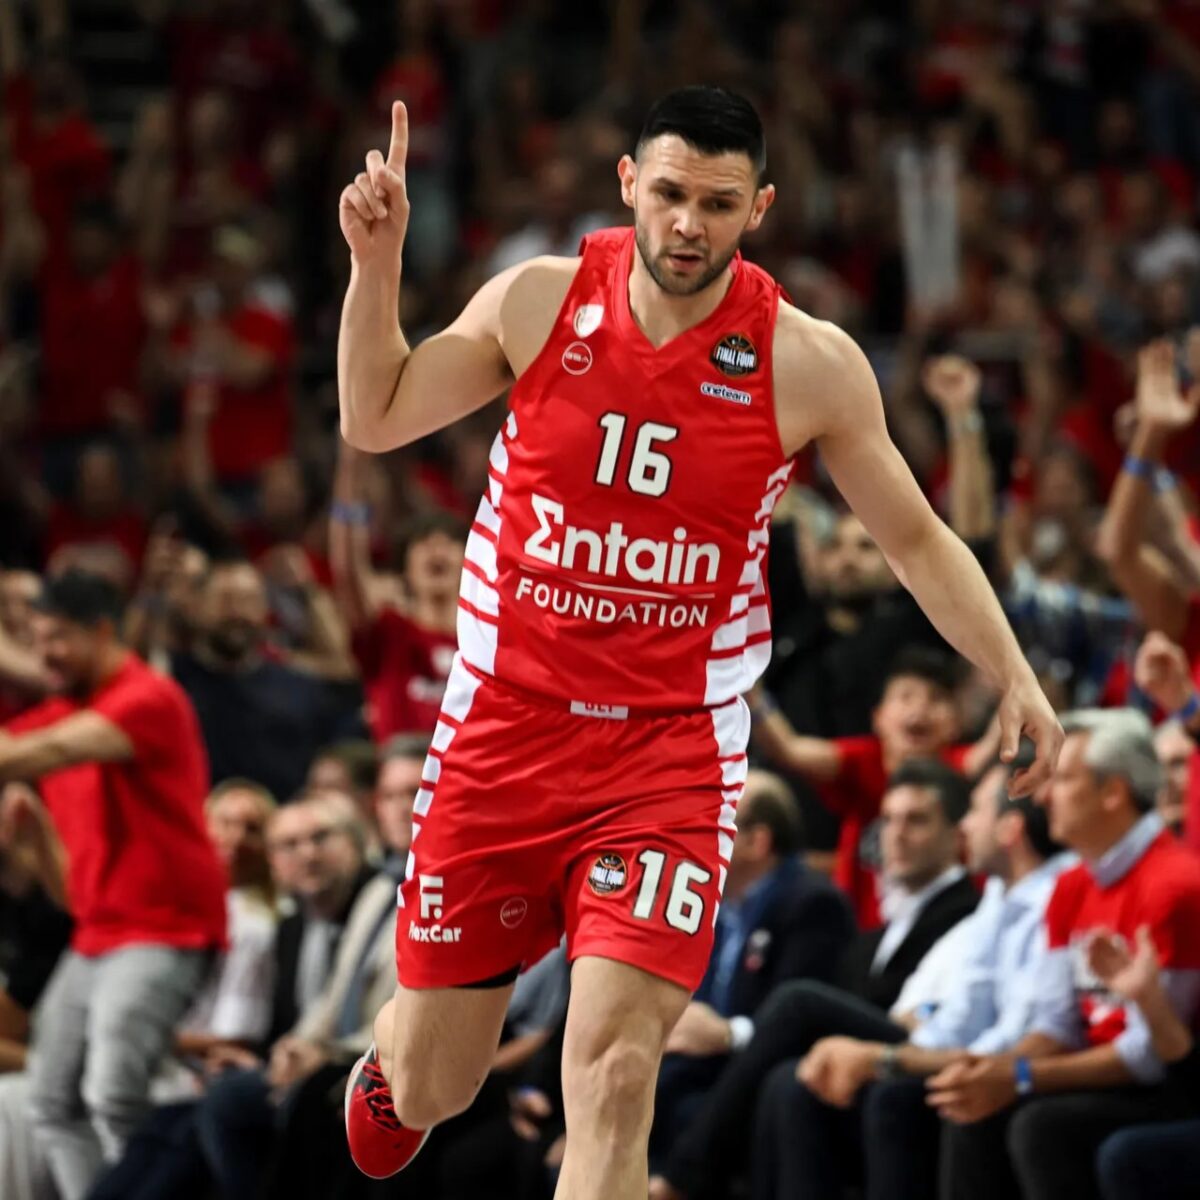 Georgios Bartzokas and Olympiacos will hope that Kostas Papanikolaou can lead them back to the summit of Euroleague Basketball.